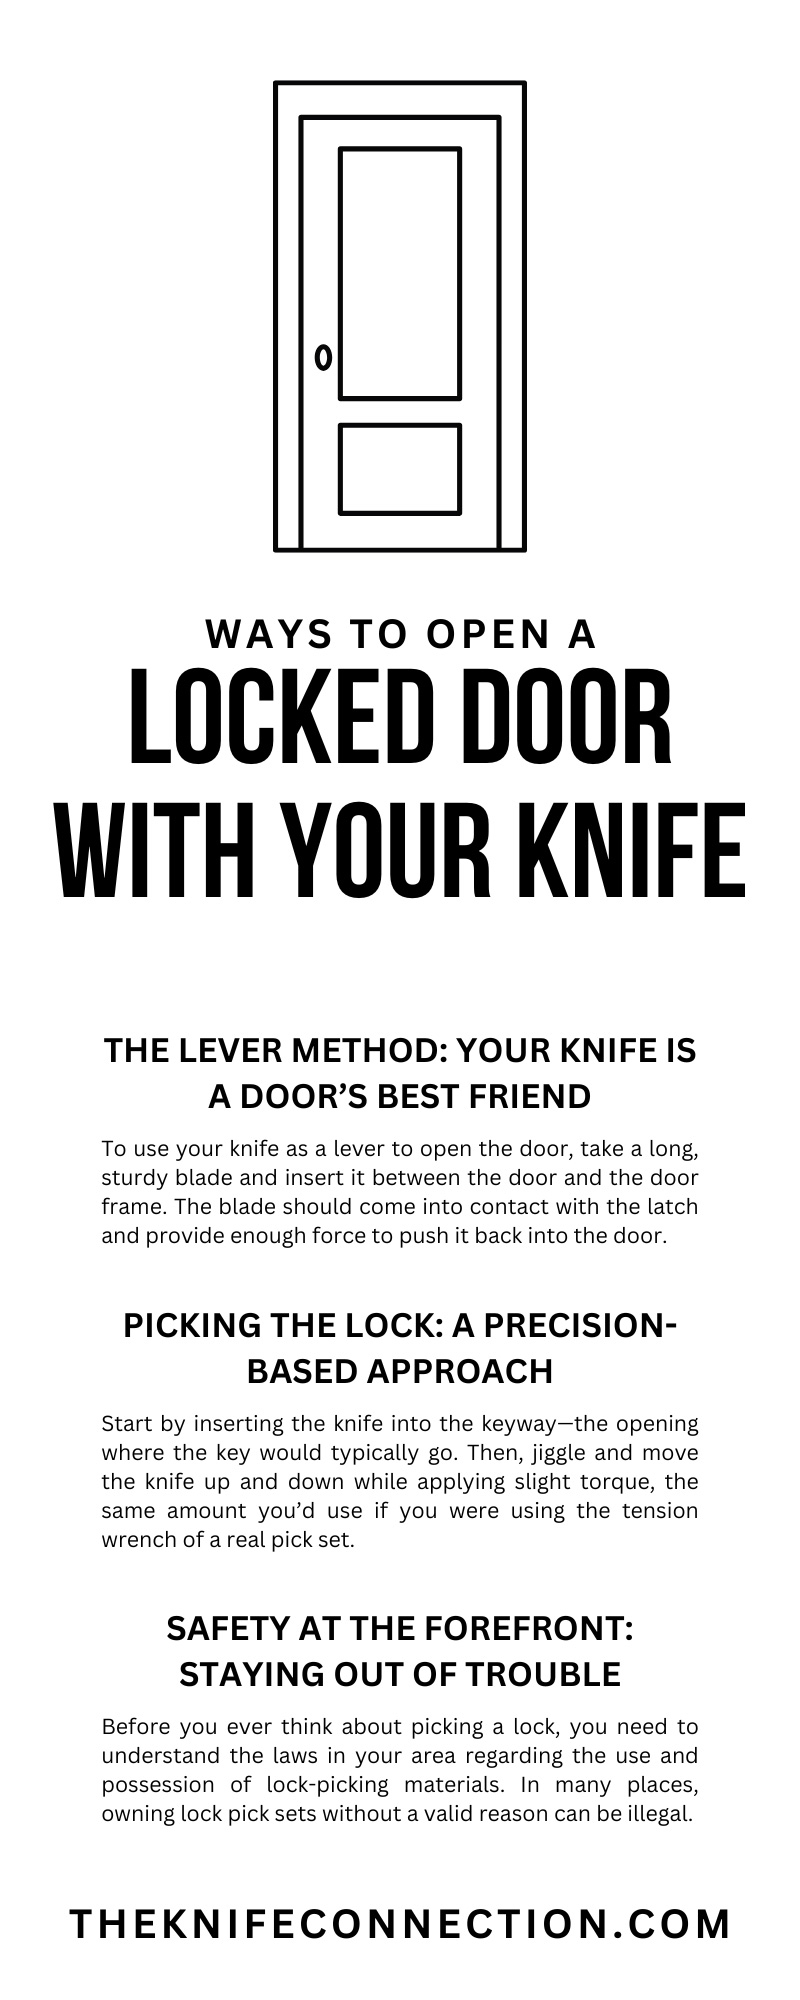 Ways To Open a Locked Door With Your Knife